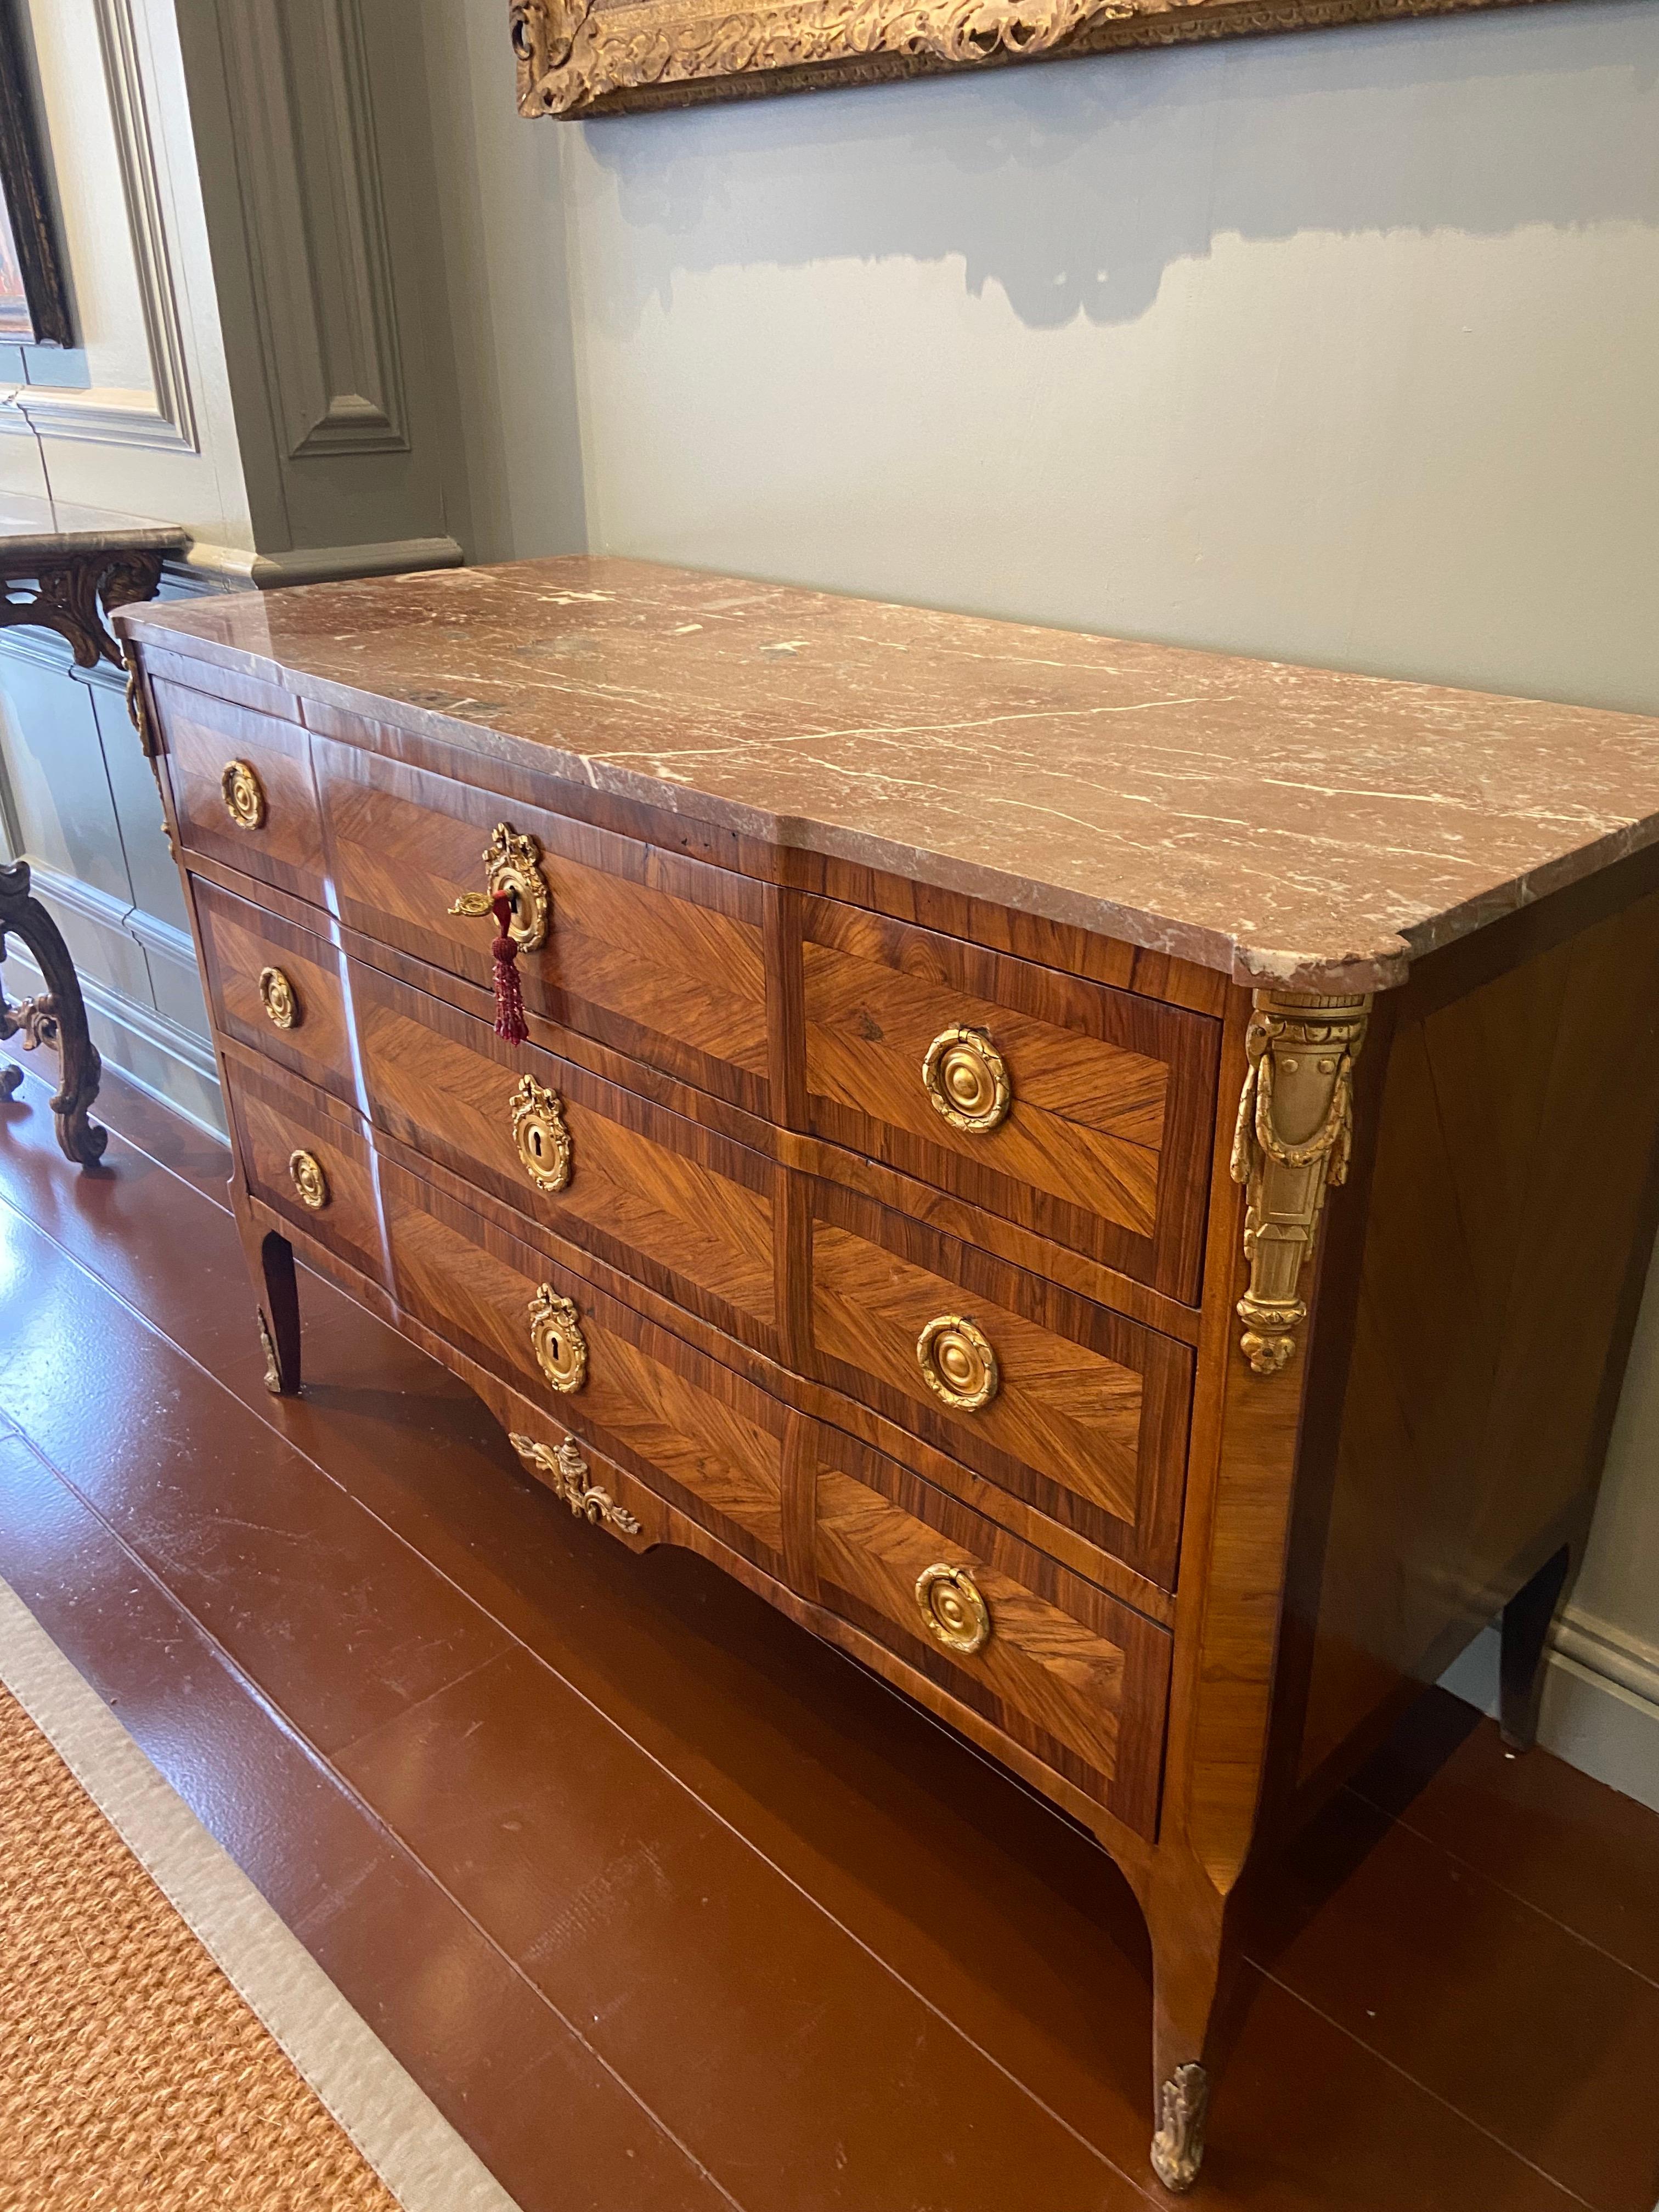 Louis XV Ormolu-Mounted Kingwood and Fruitwood Commode 'Mid 18th Century' For Sale 6